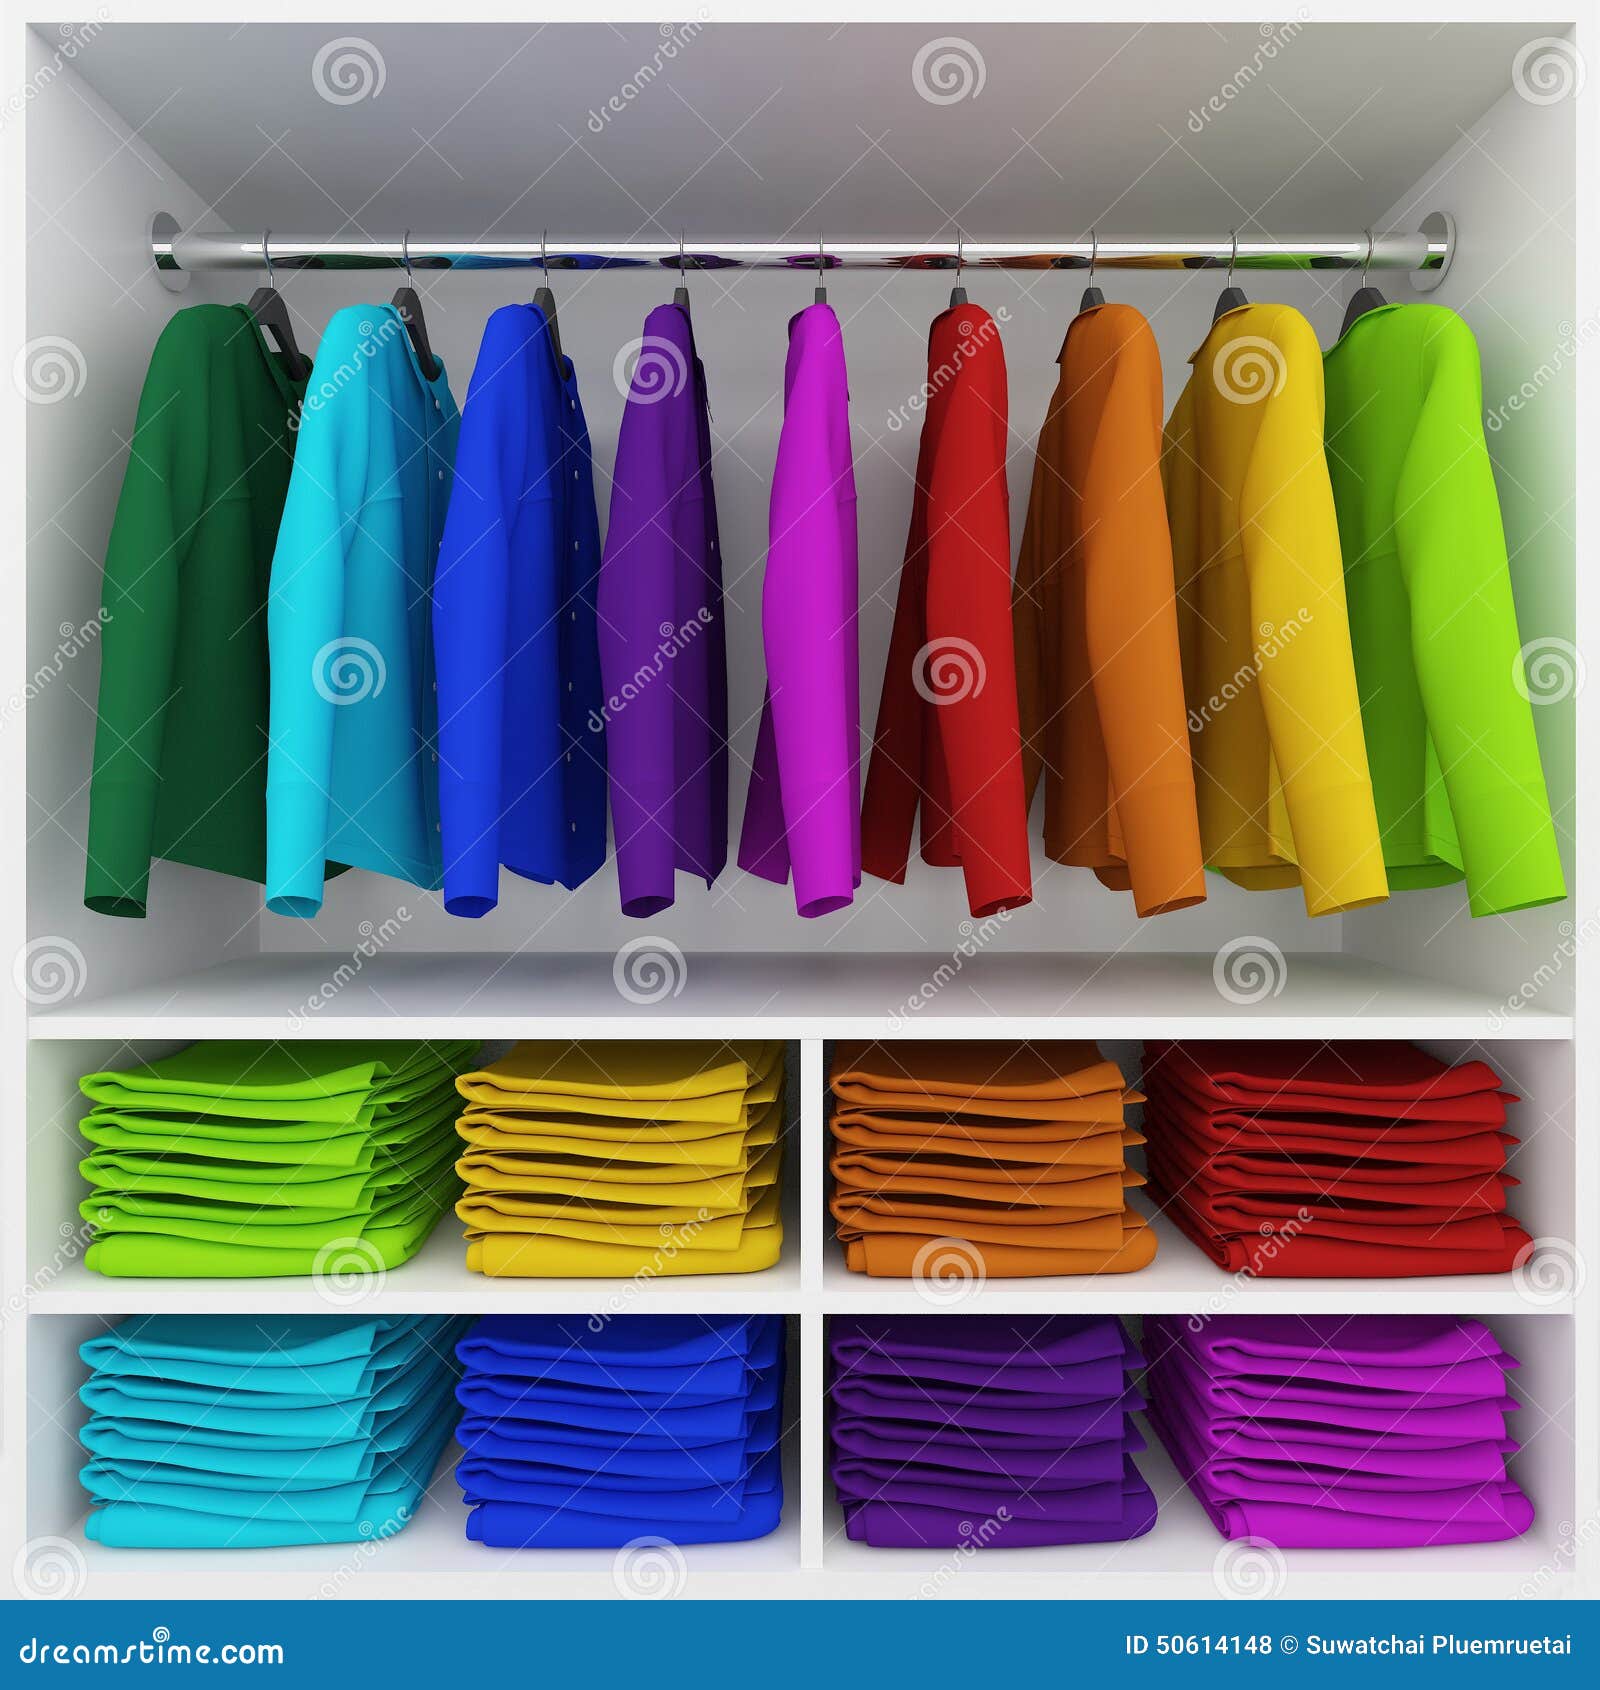 colorful clothes hanging and stack of clothing in wardrobe